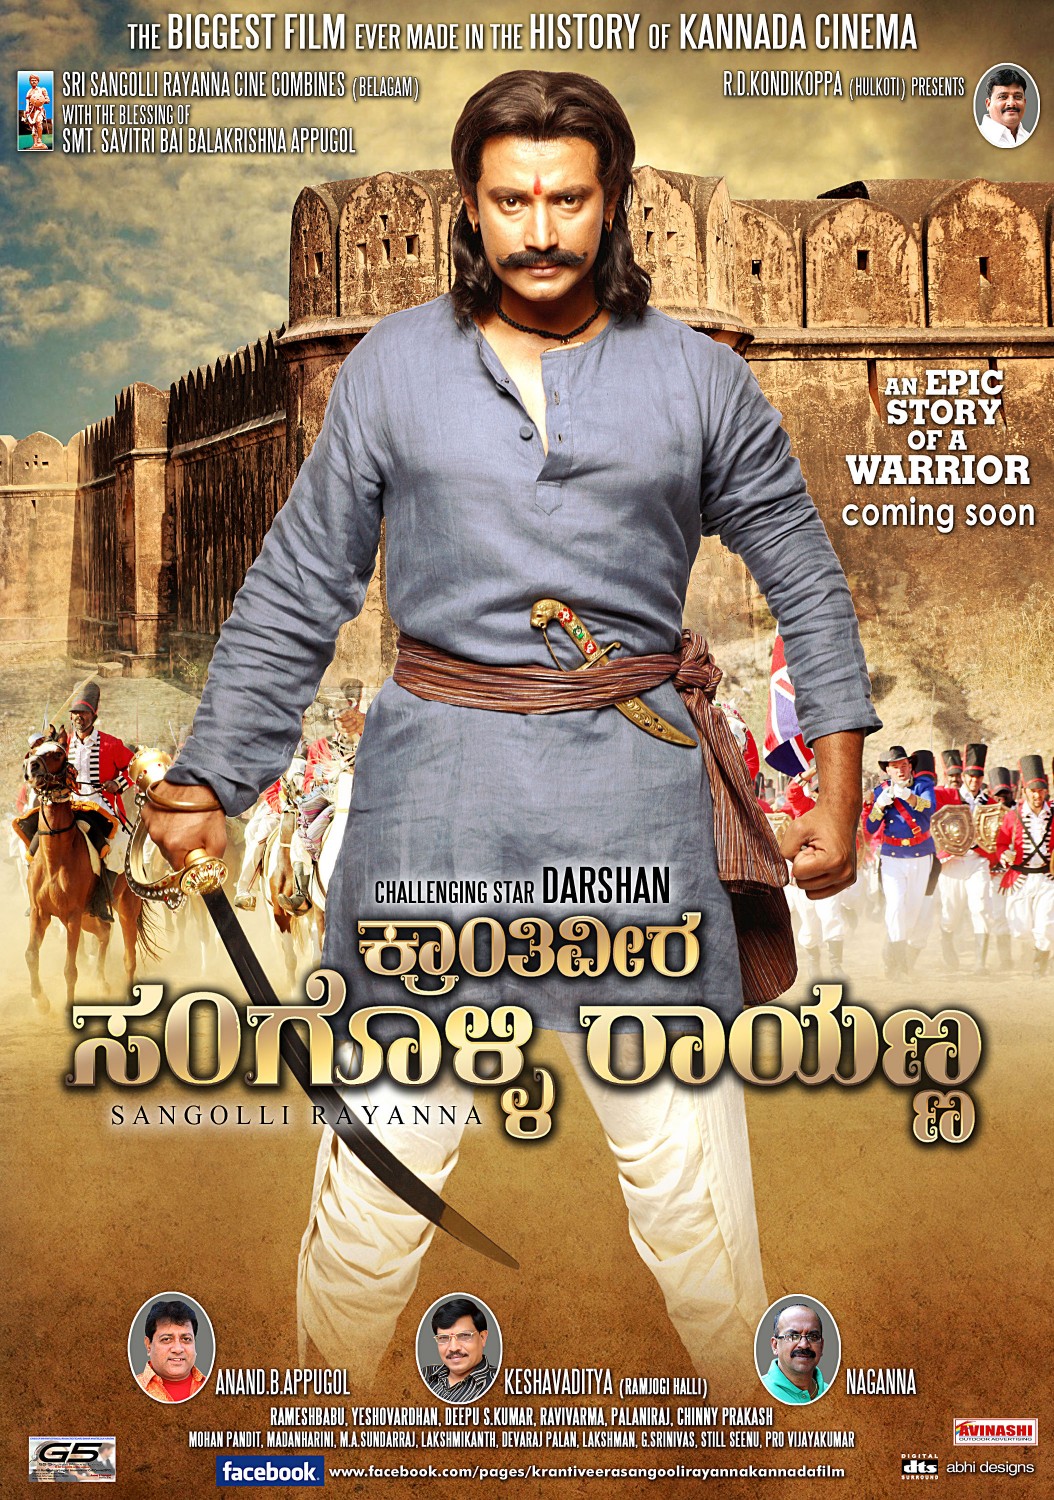 Extra Large Movie Poster Image for Sangolli Rayanna (#37 of 79)